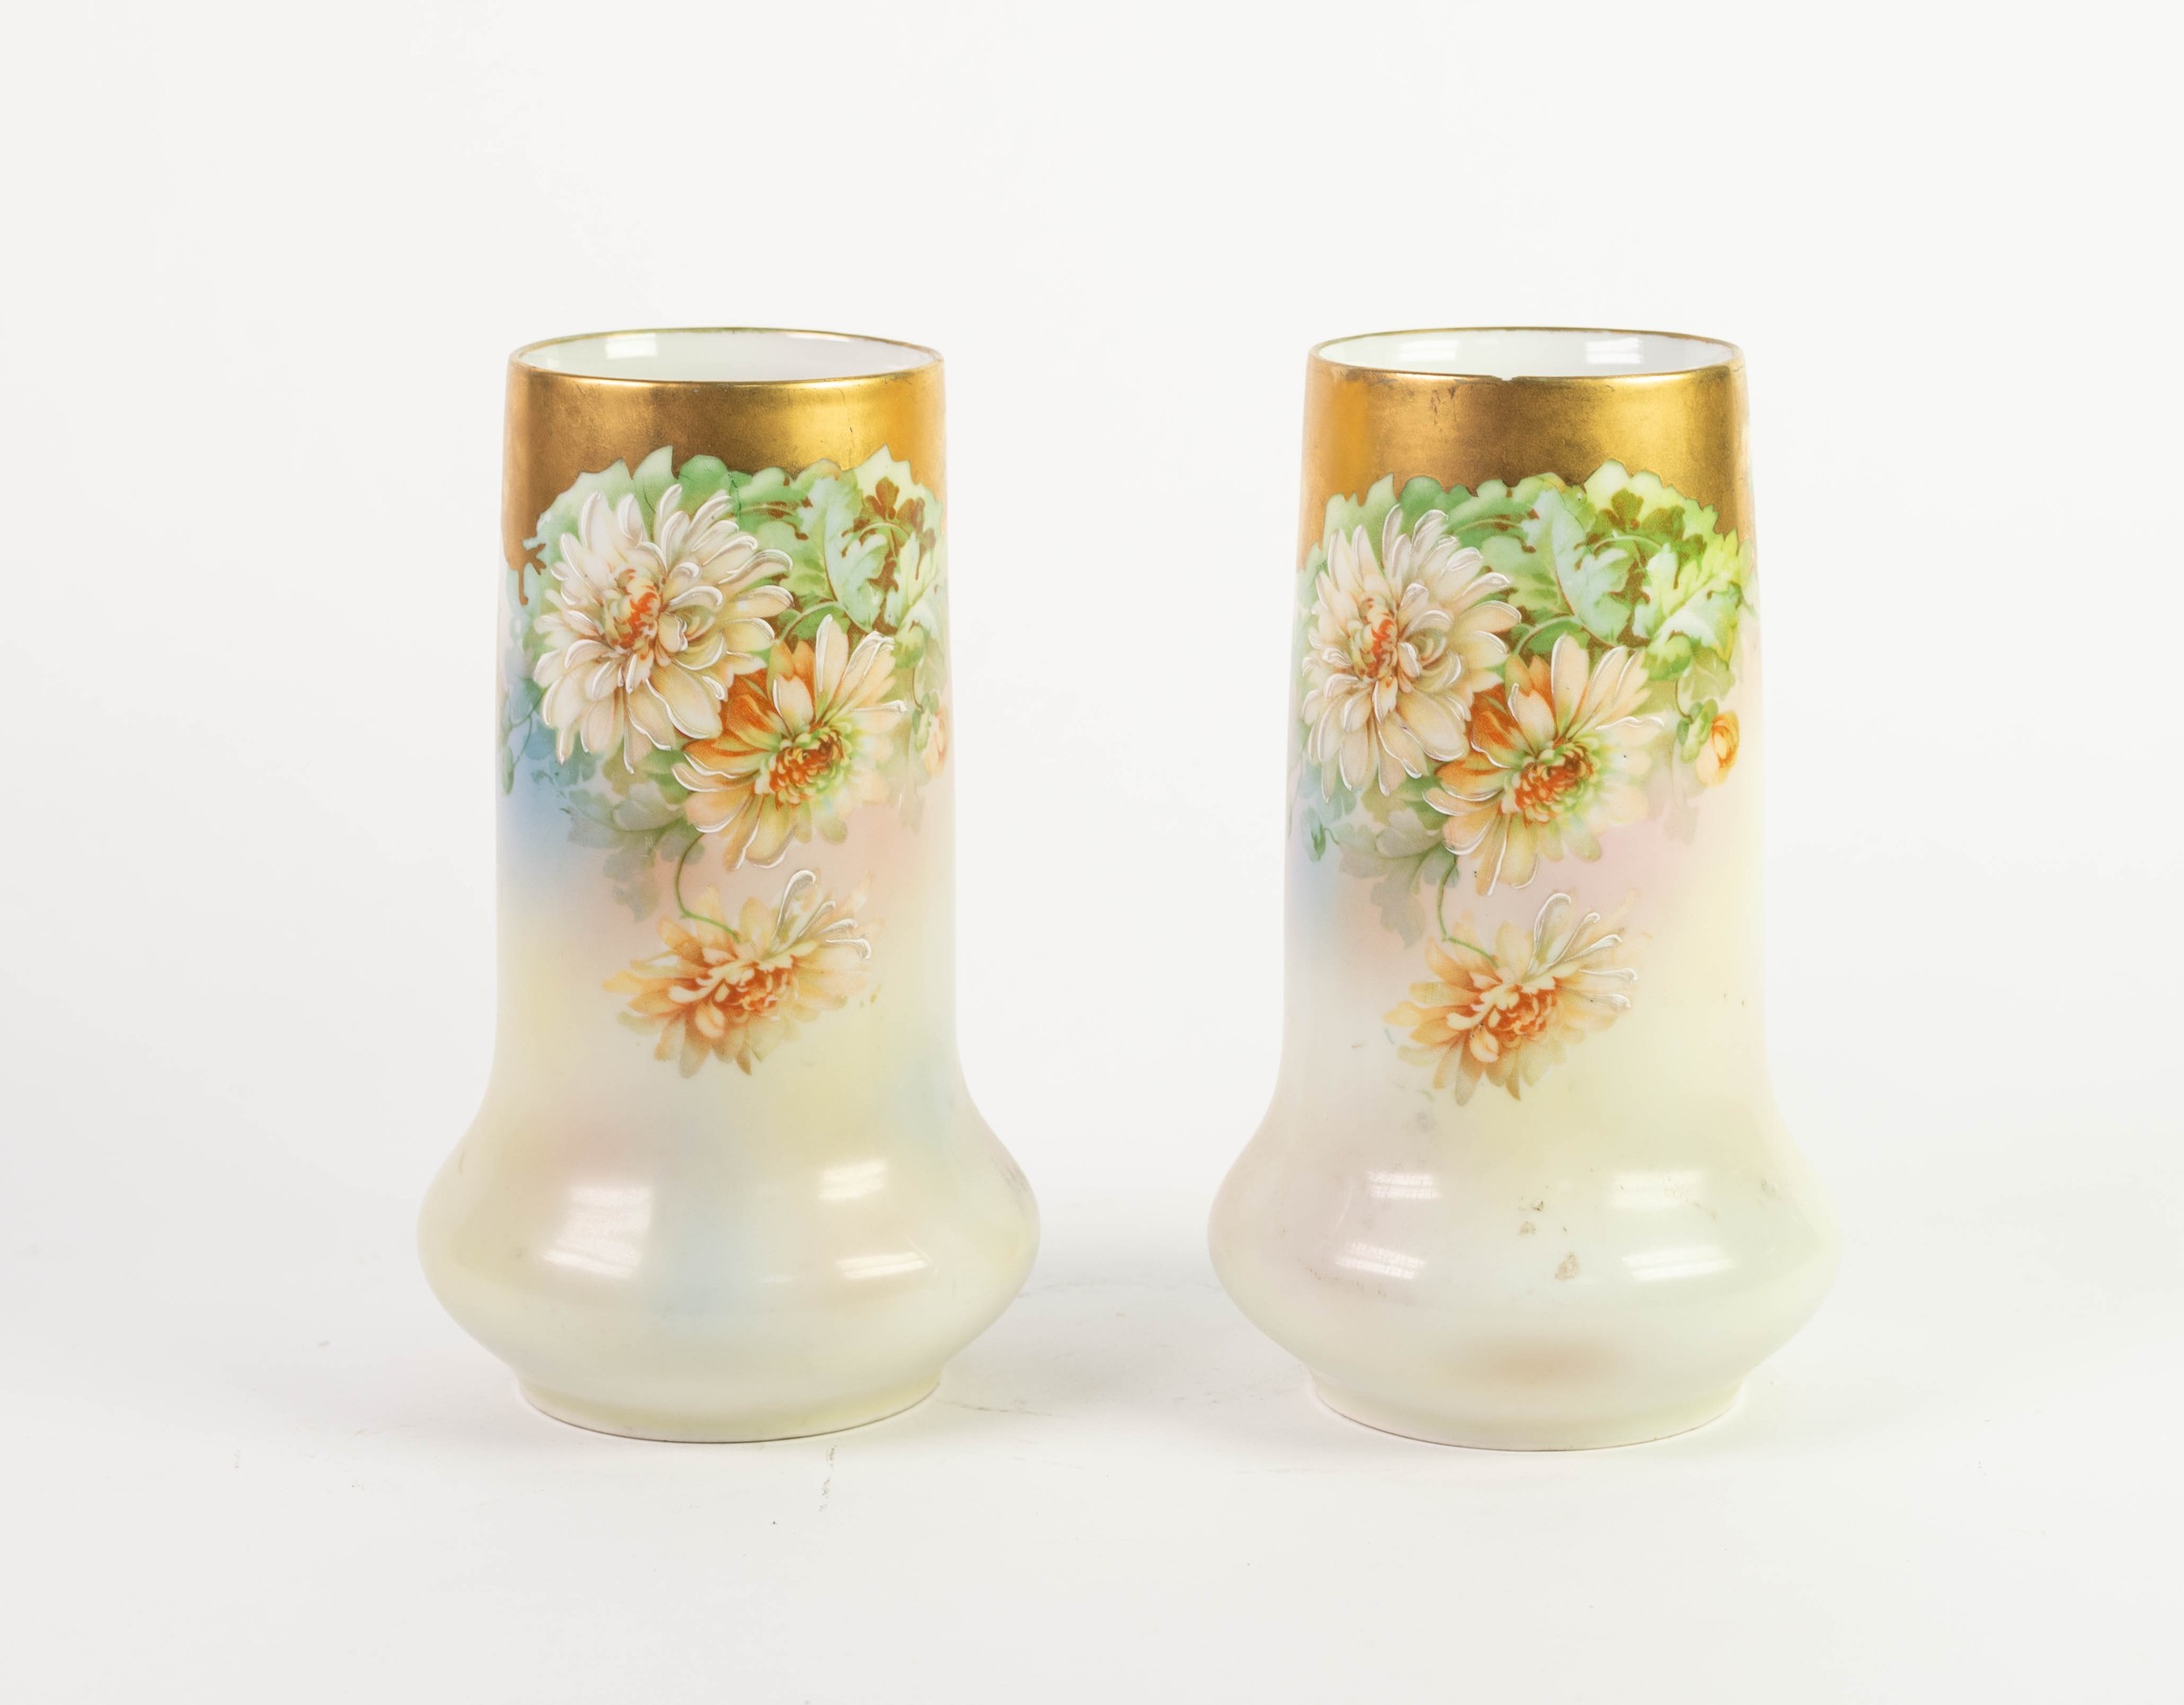 PAIR OF MORITZ ZDEKAUER, STARA ROLE, VIENNA, PORCELAIN VASES, each of slightly tapering, cylindrical